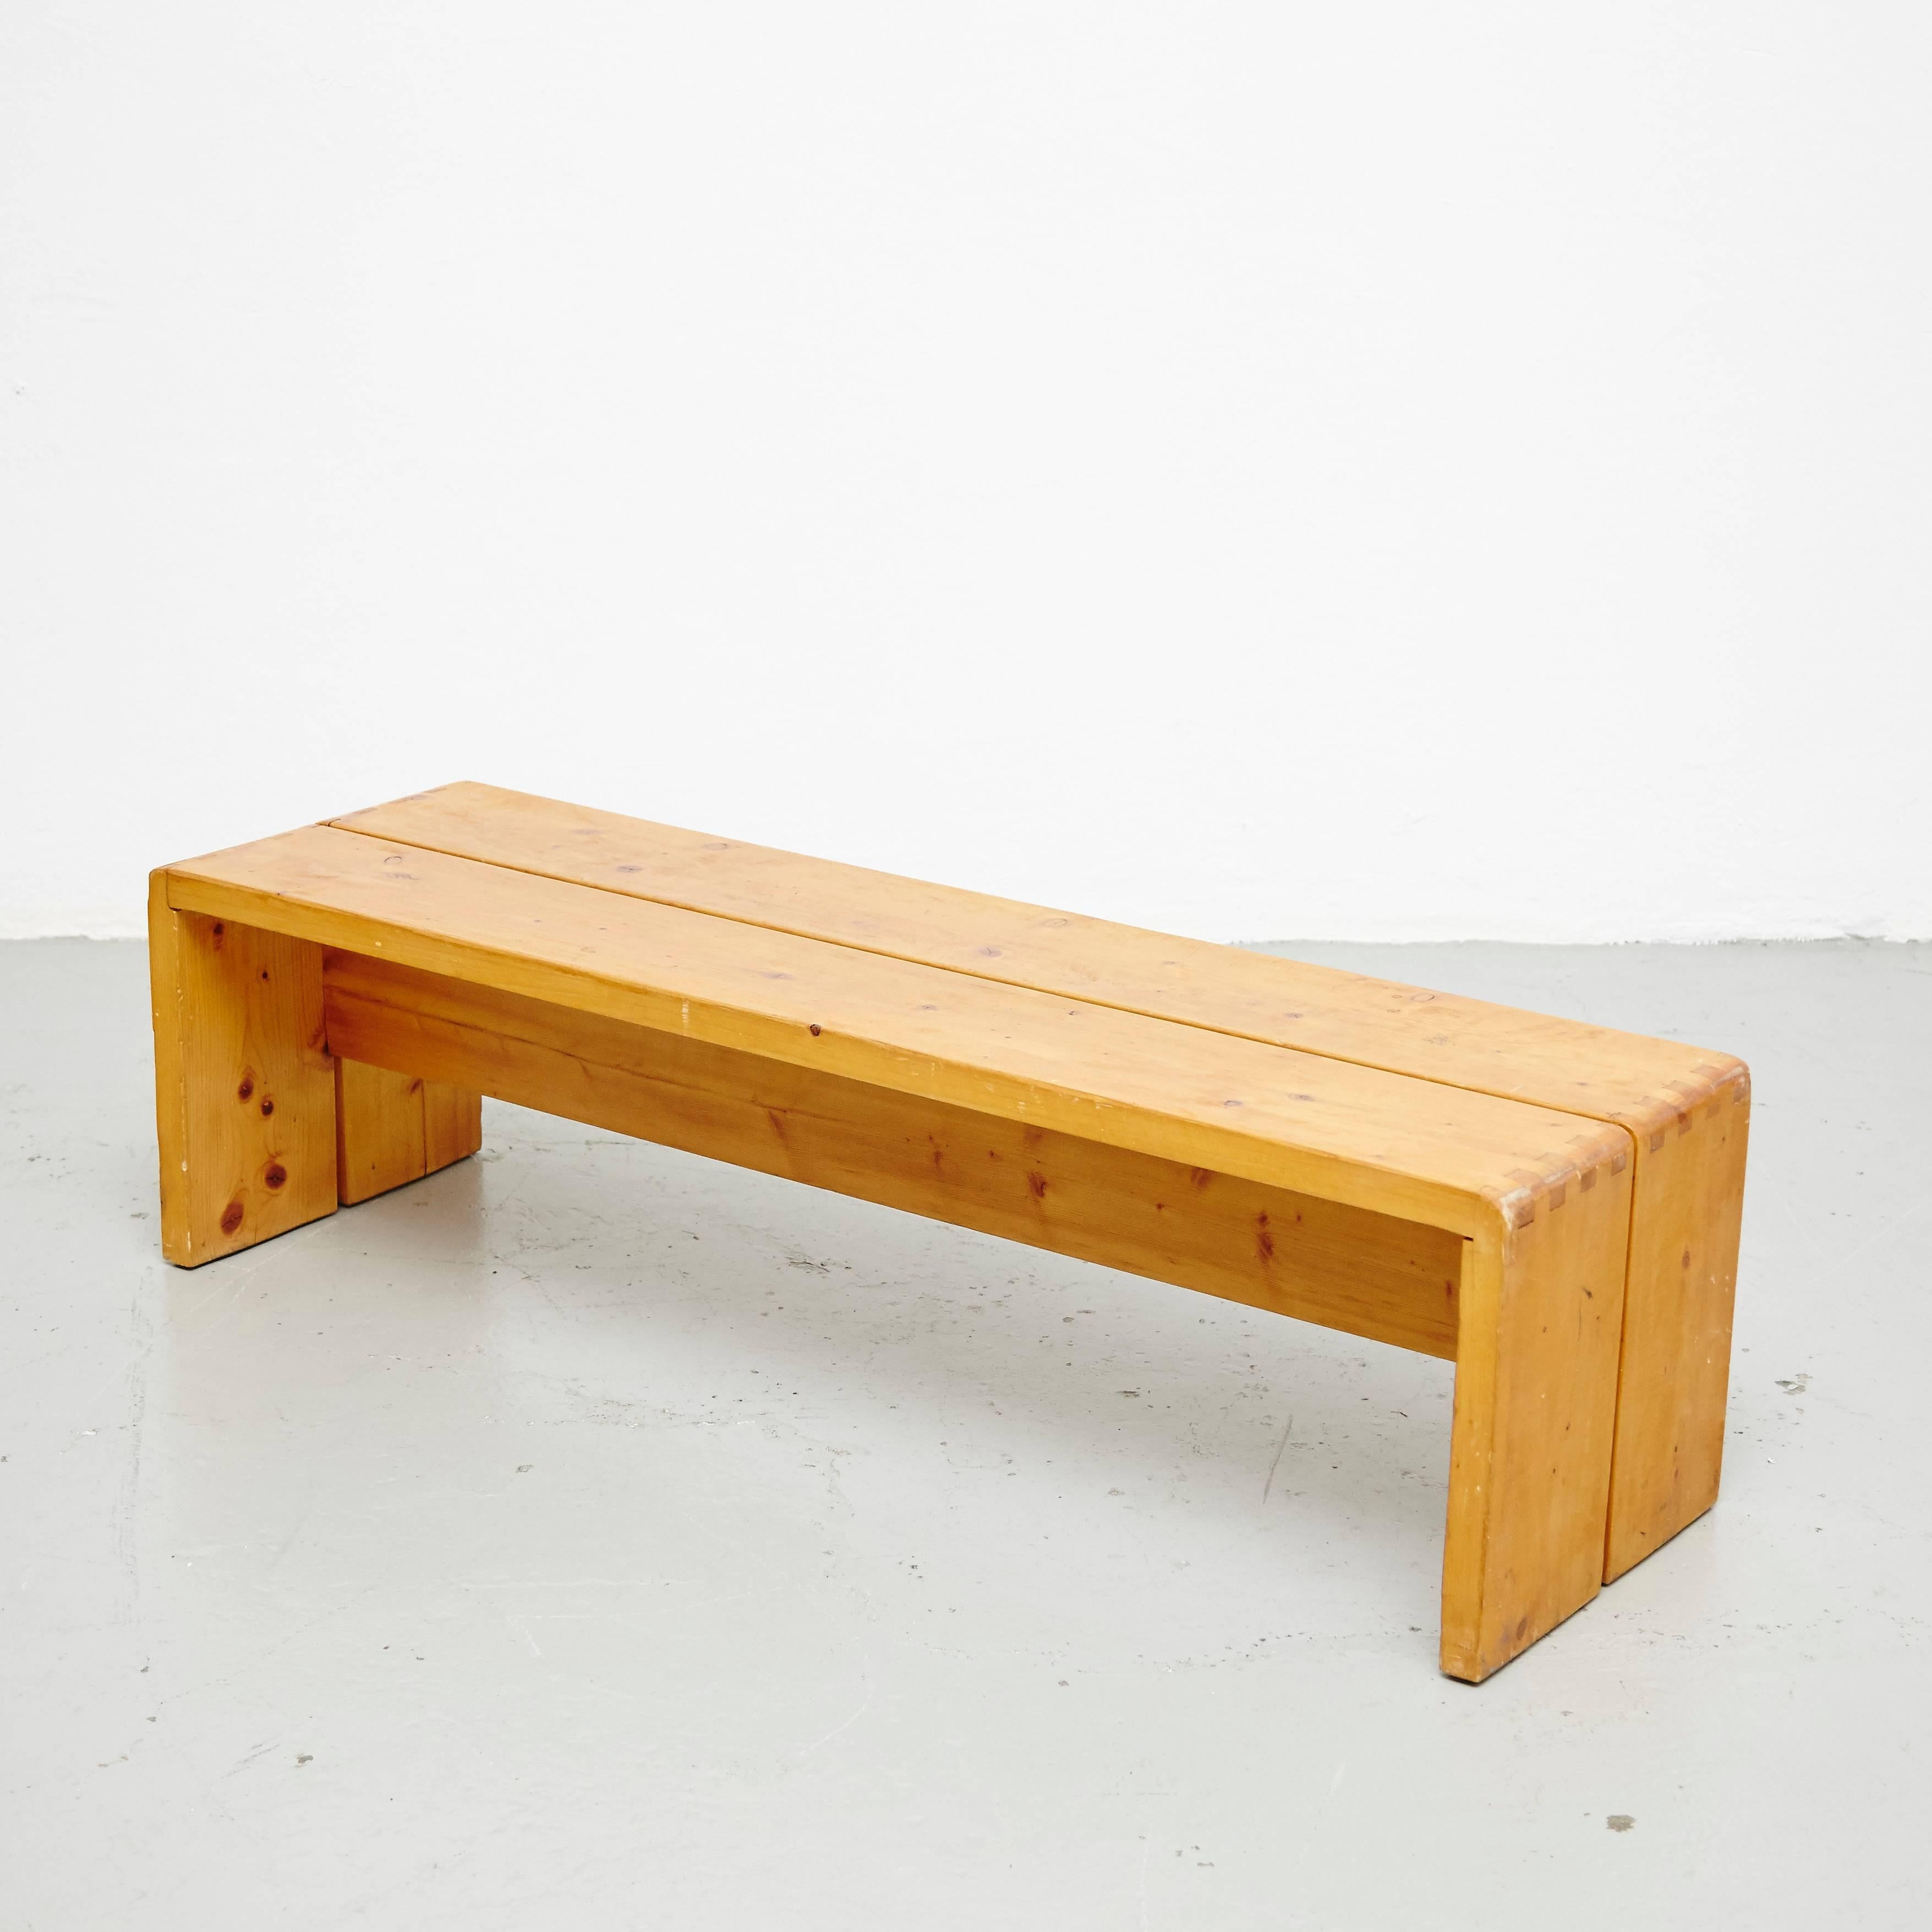 Benches designed by Charlotte Perriand for Les Arcs ski resort circa 1960, manufactured in France.
Pine wood.

In good original condition, with minor wear consistent with age and use, preserving a beautiful patina.

Charlotte Perriand